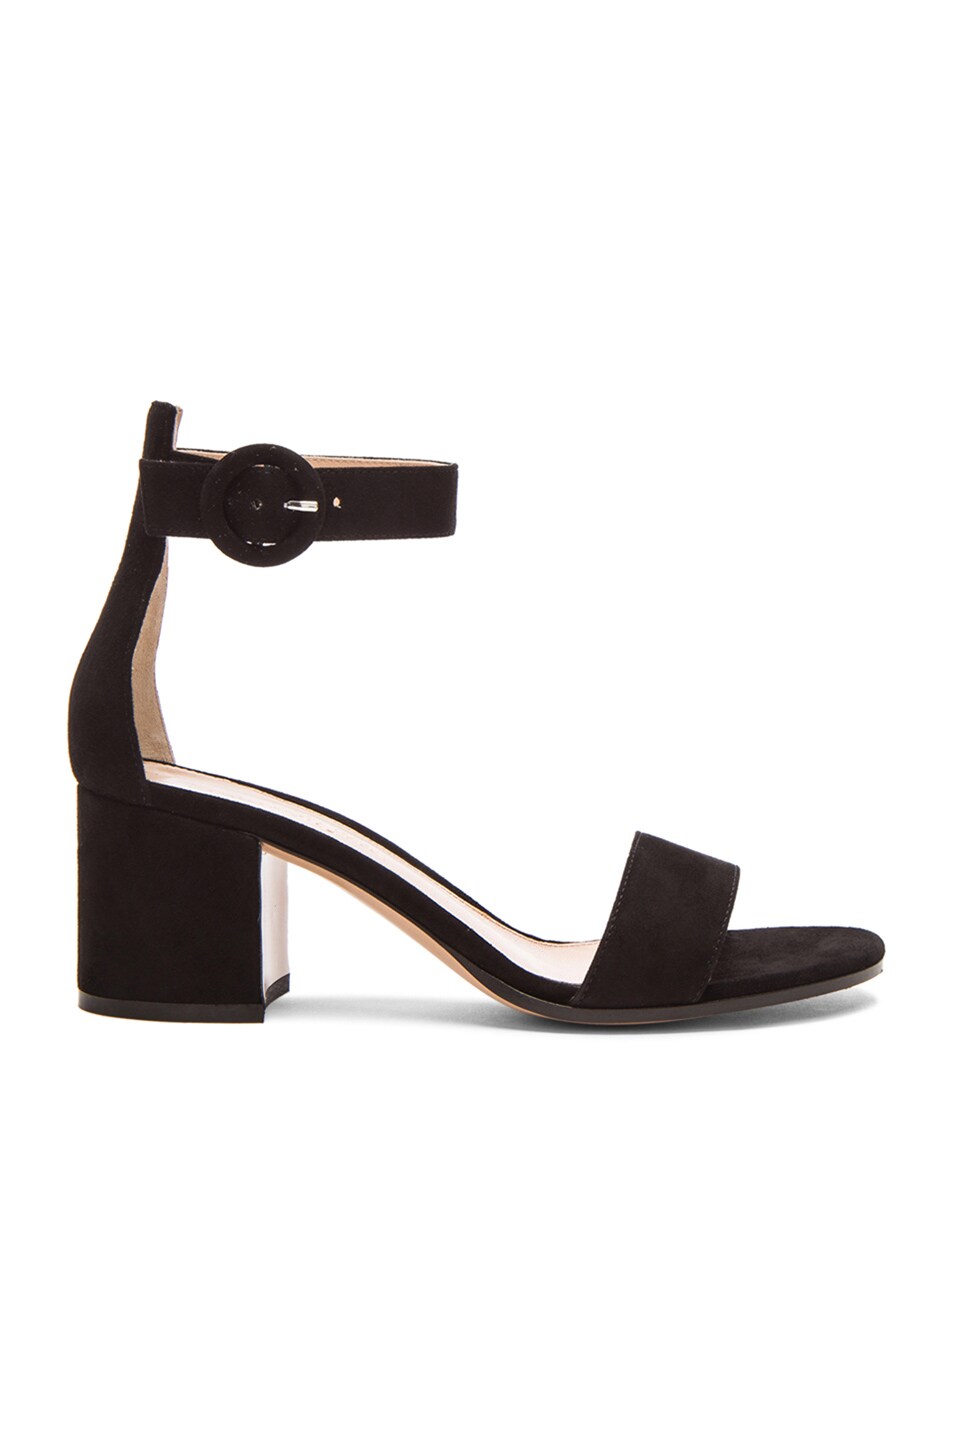 Image 1 of Gianvito Rossi Ankle Strap Suede Heels in Black Suede